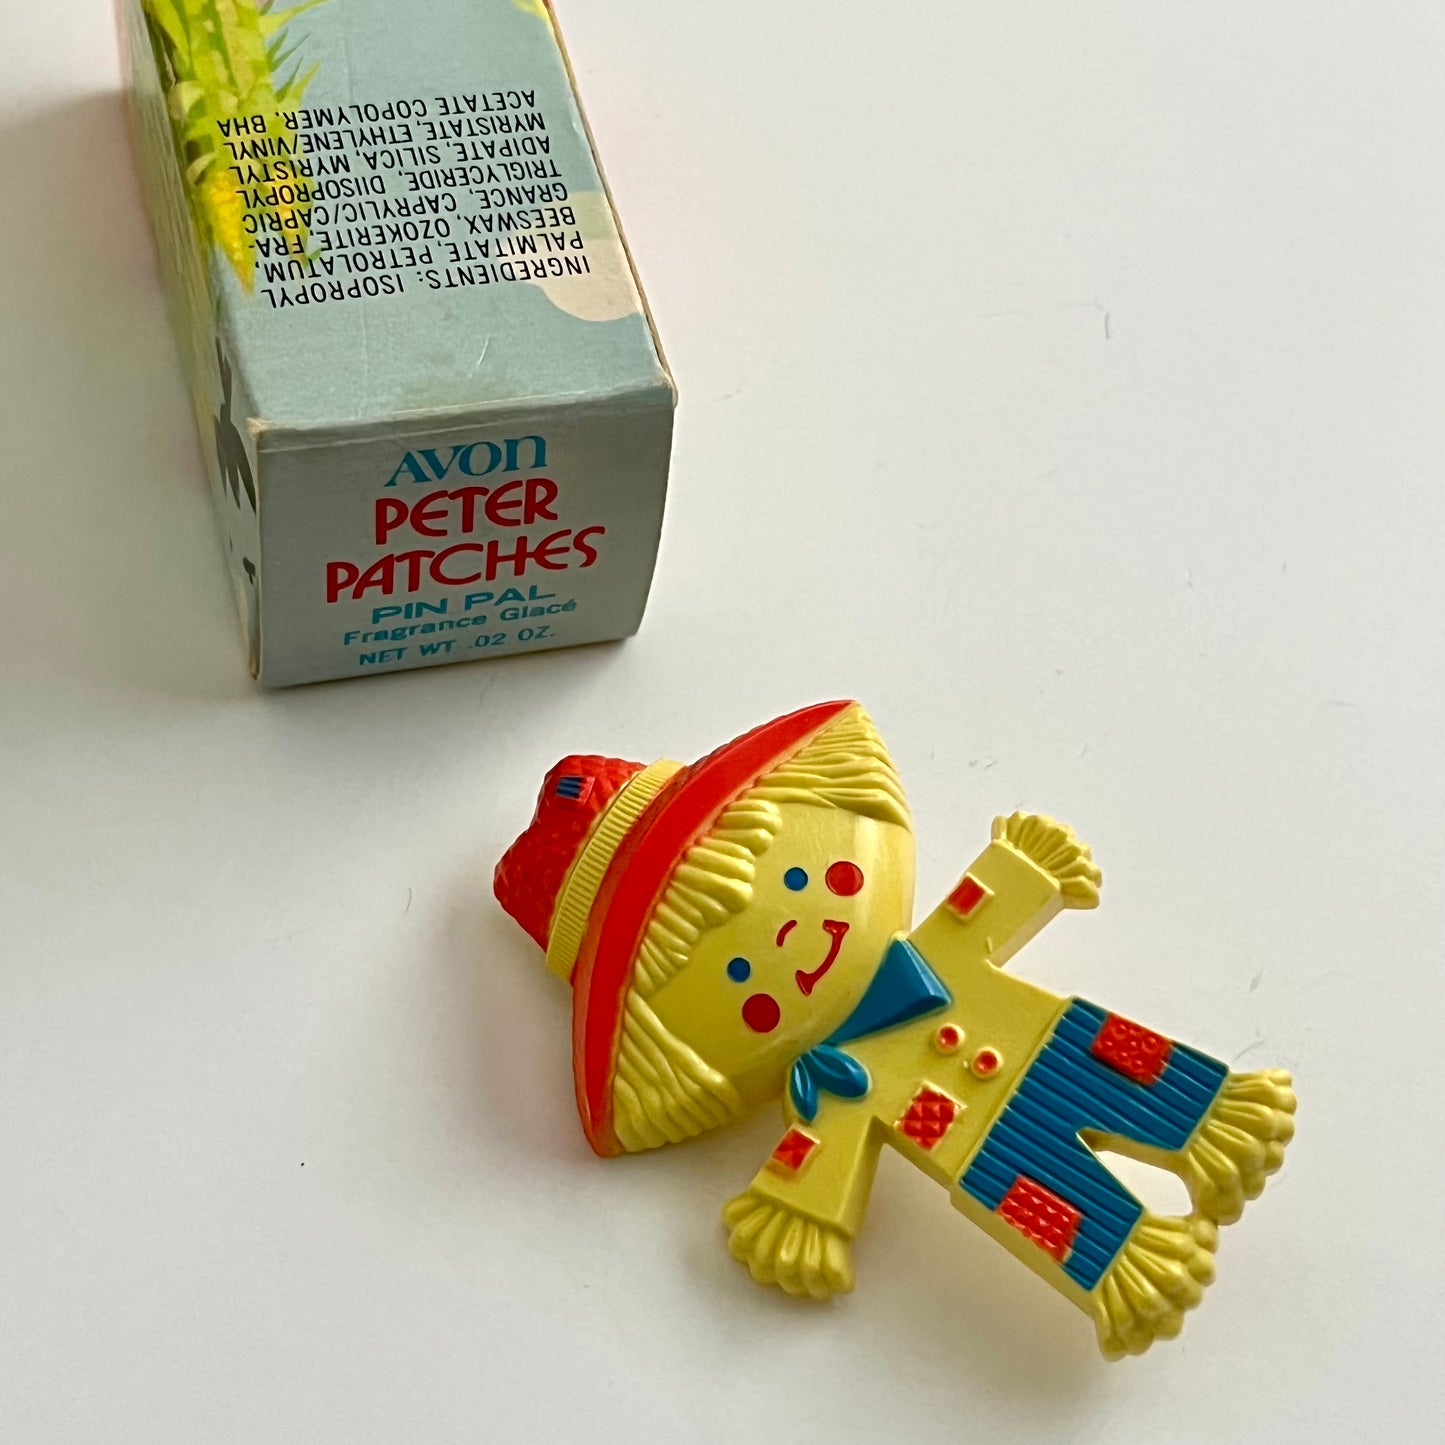 1975 Avon's Peter Patches Brooch